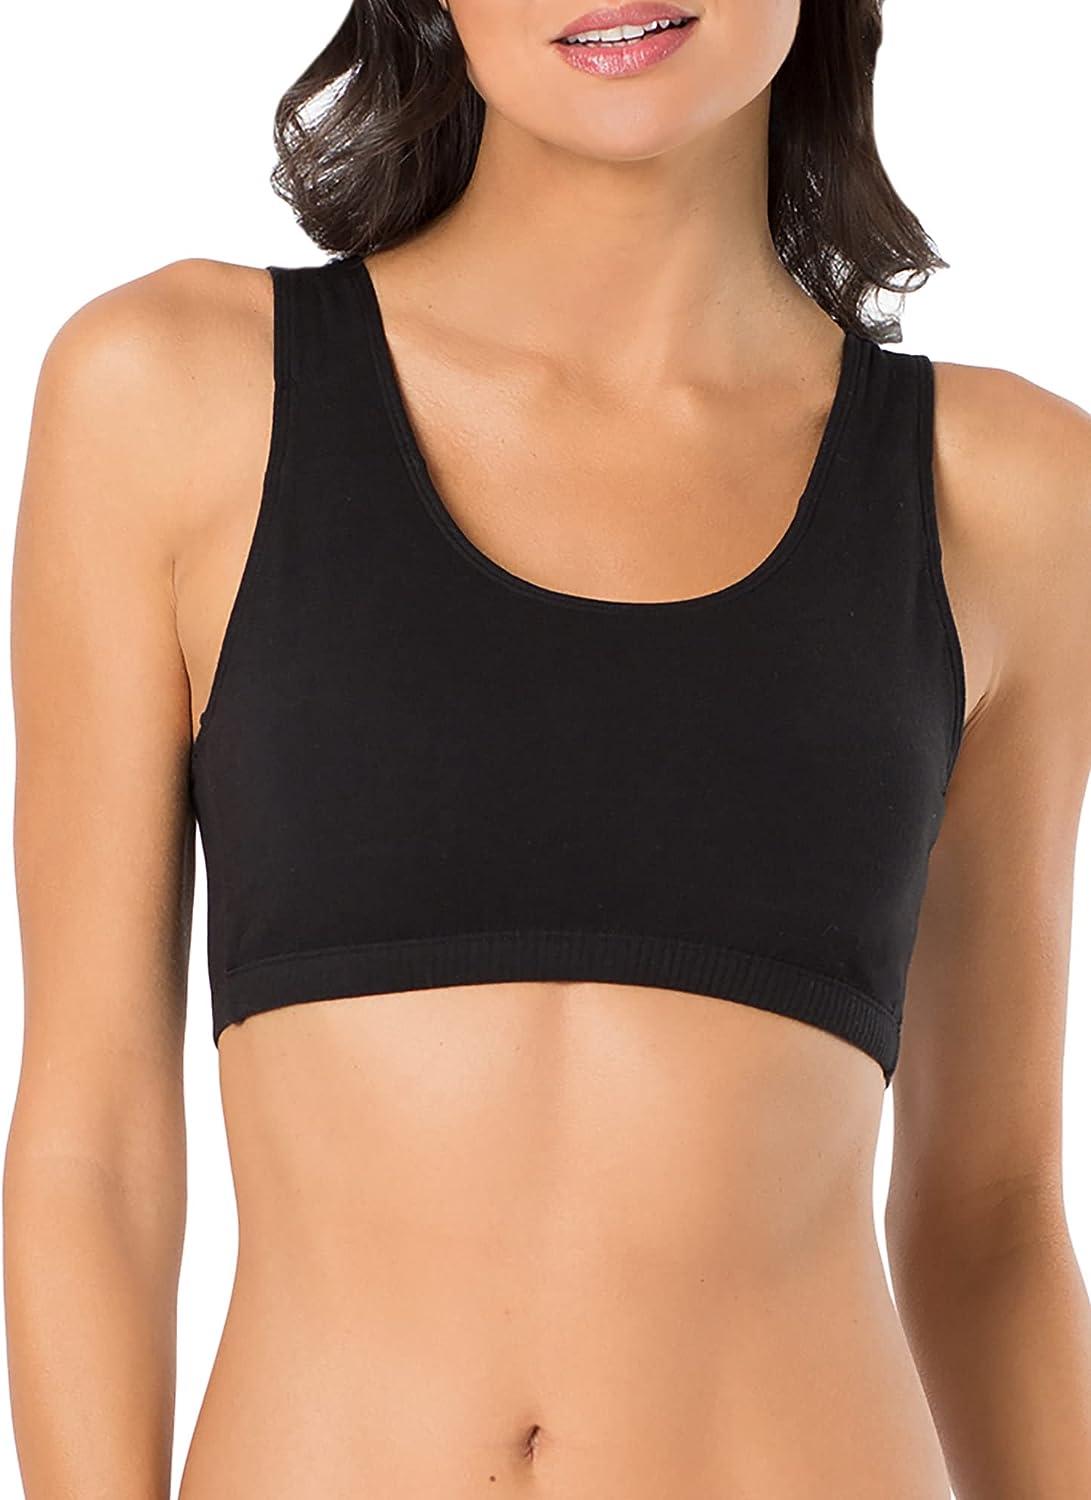 Fruit of the Loom Women's Front Close Builtup Sports Bra, Black